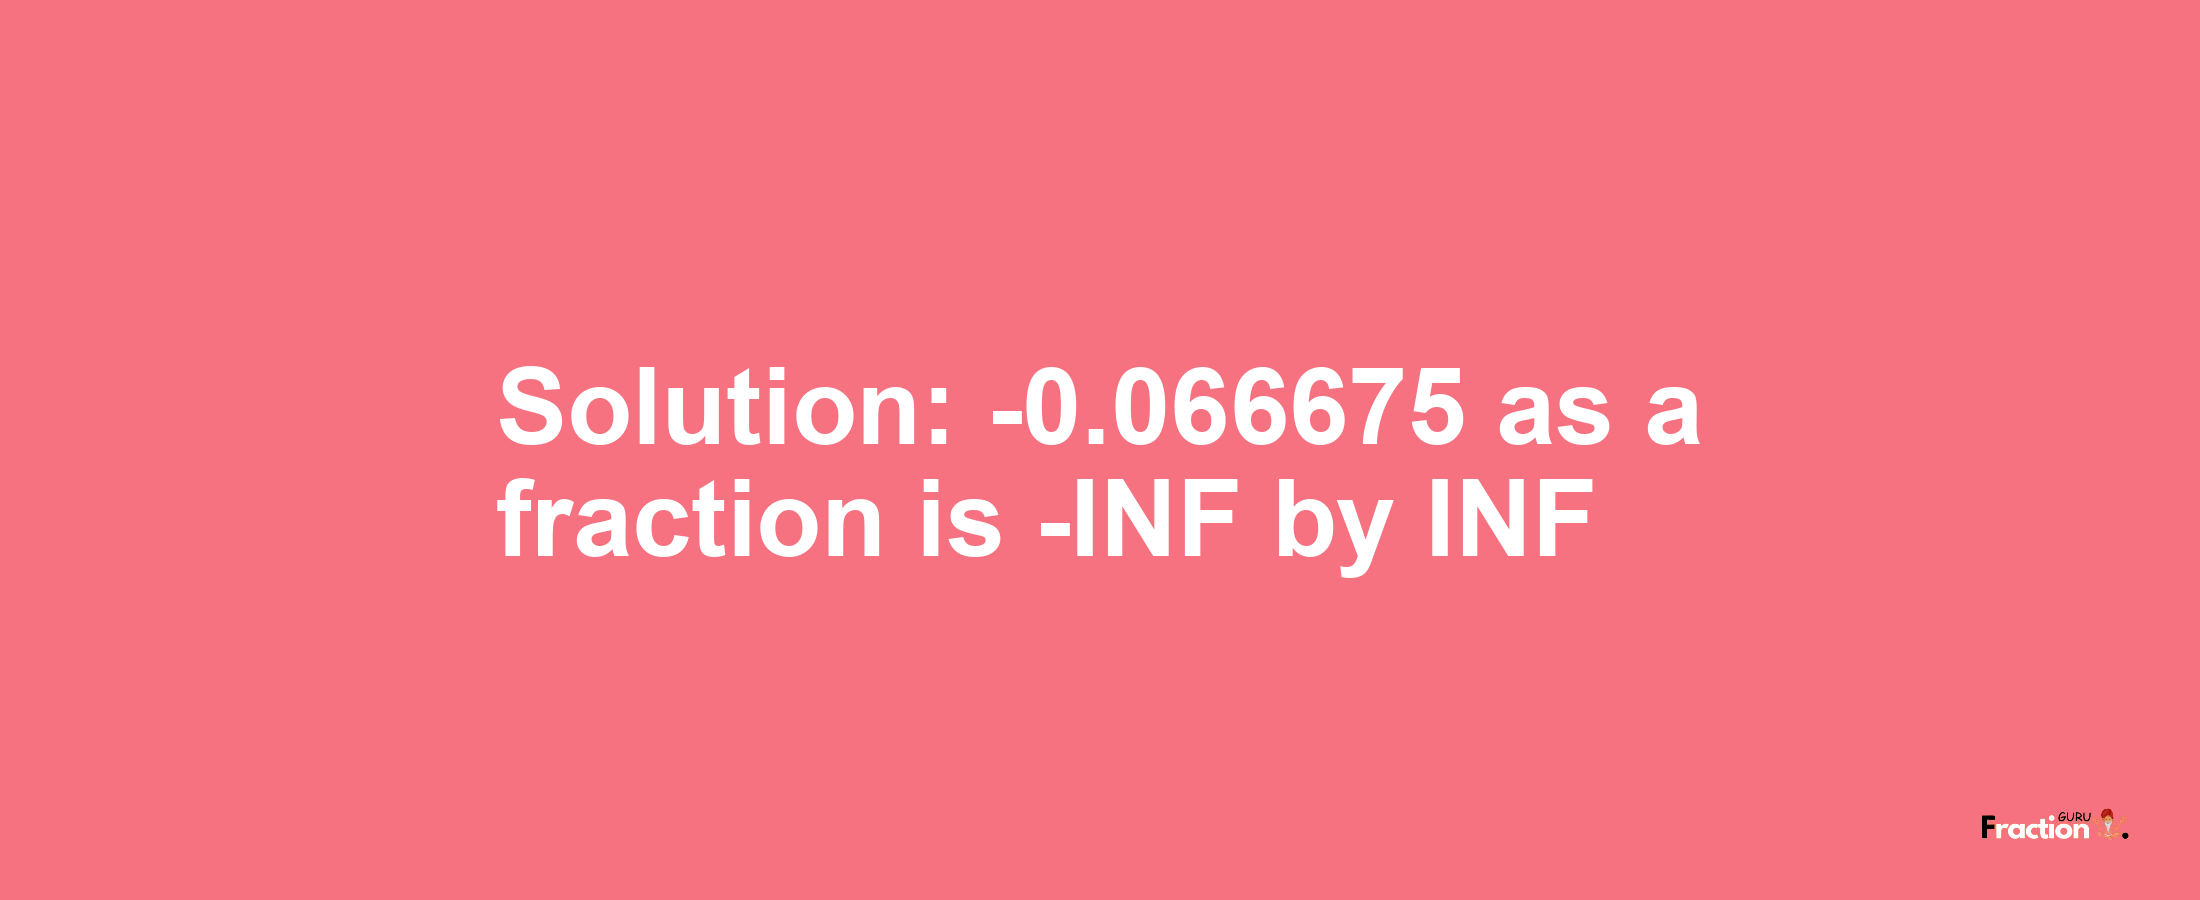 Solution:-0.066675 as a fraction is -INF/INF